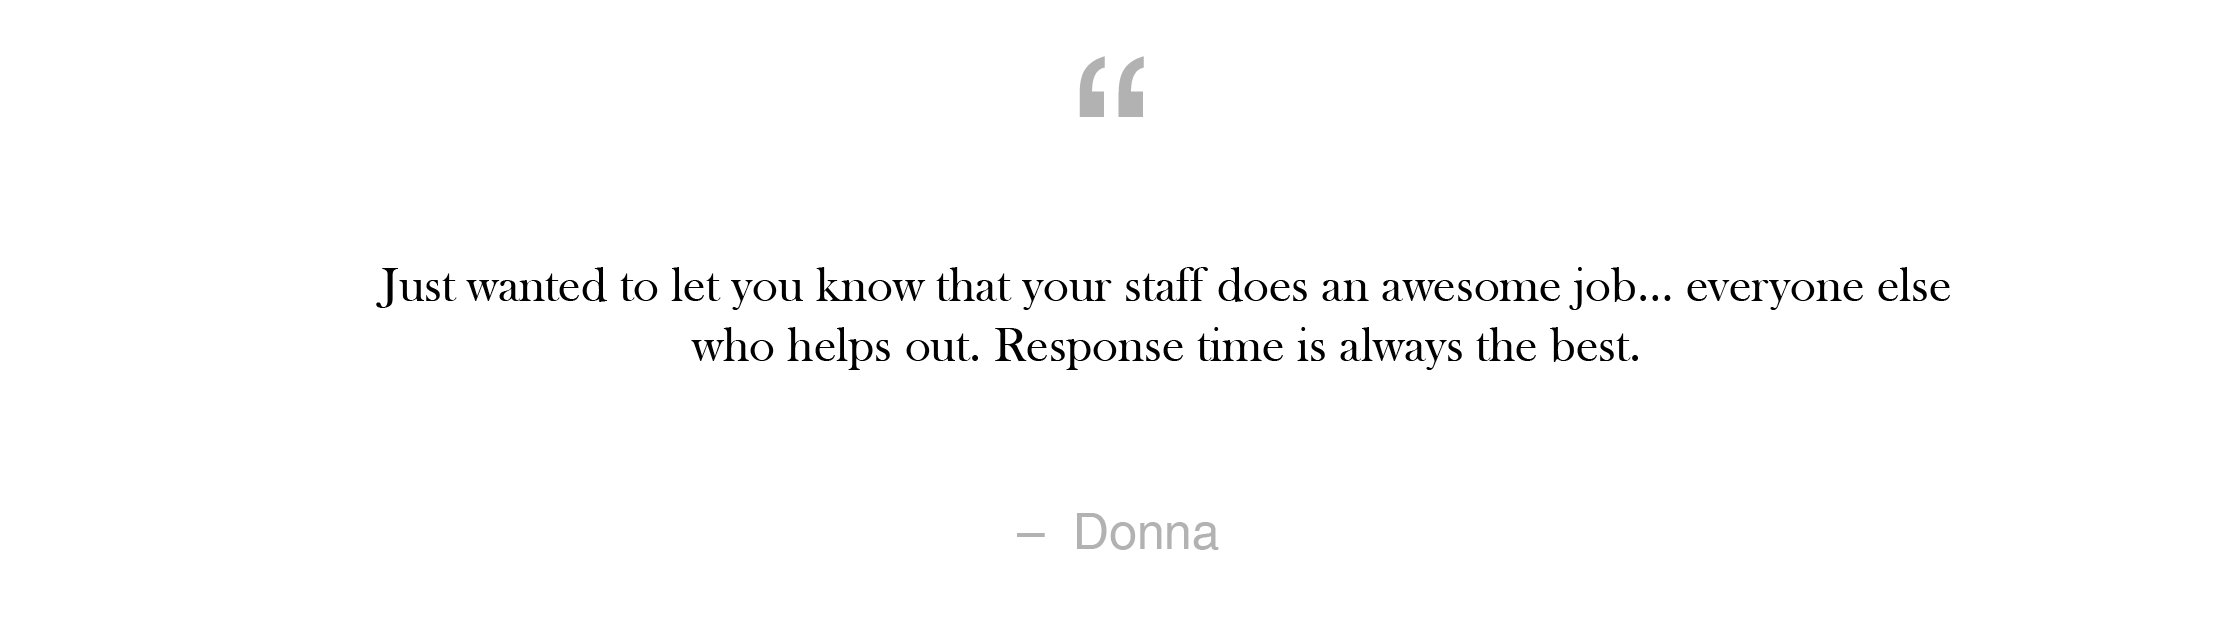 Quote#6_Donna-01.png